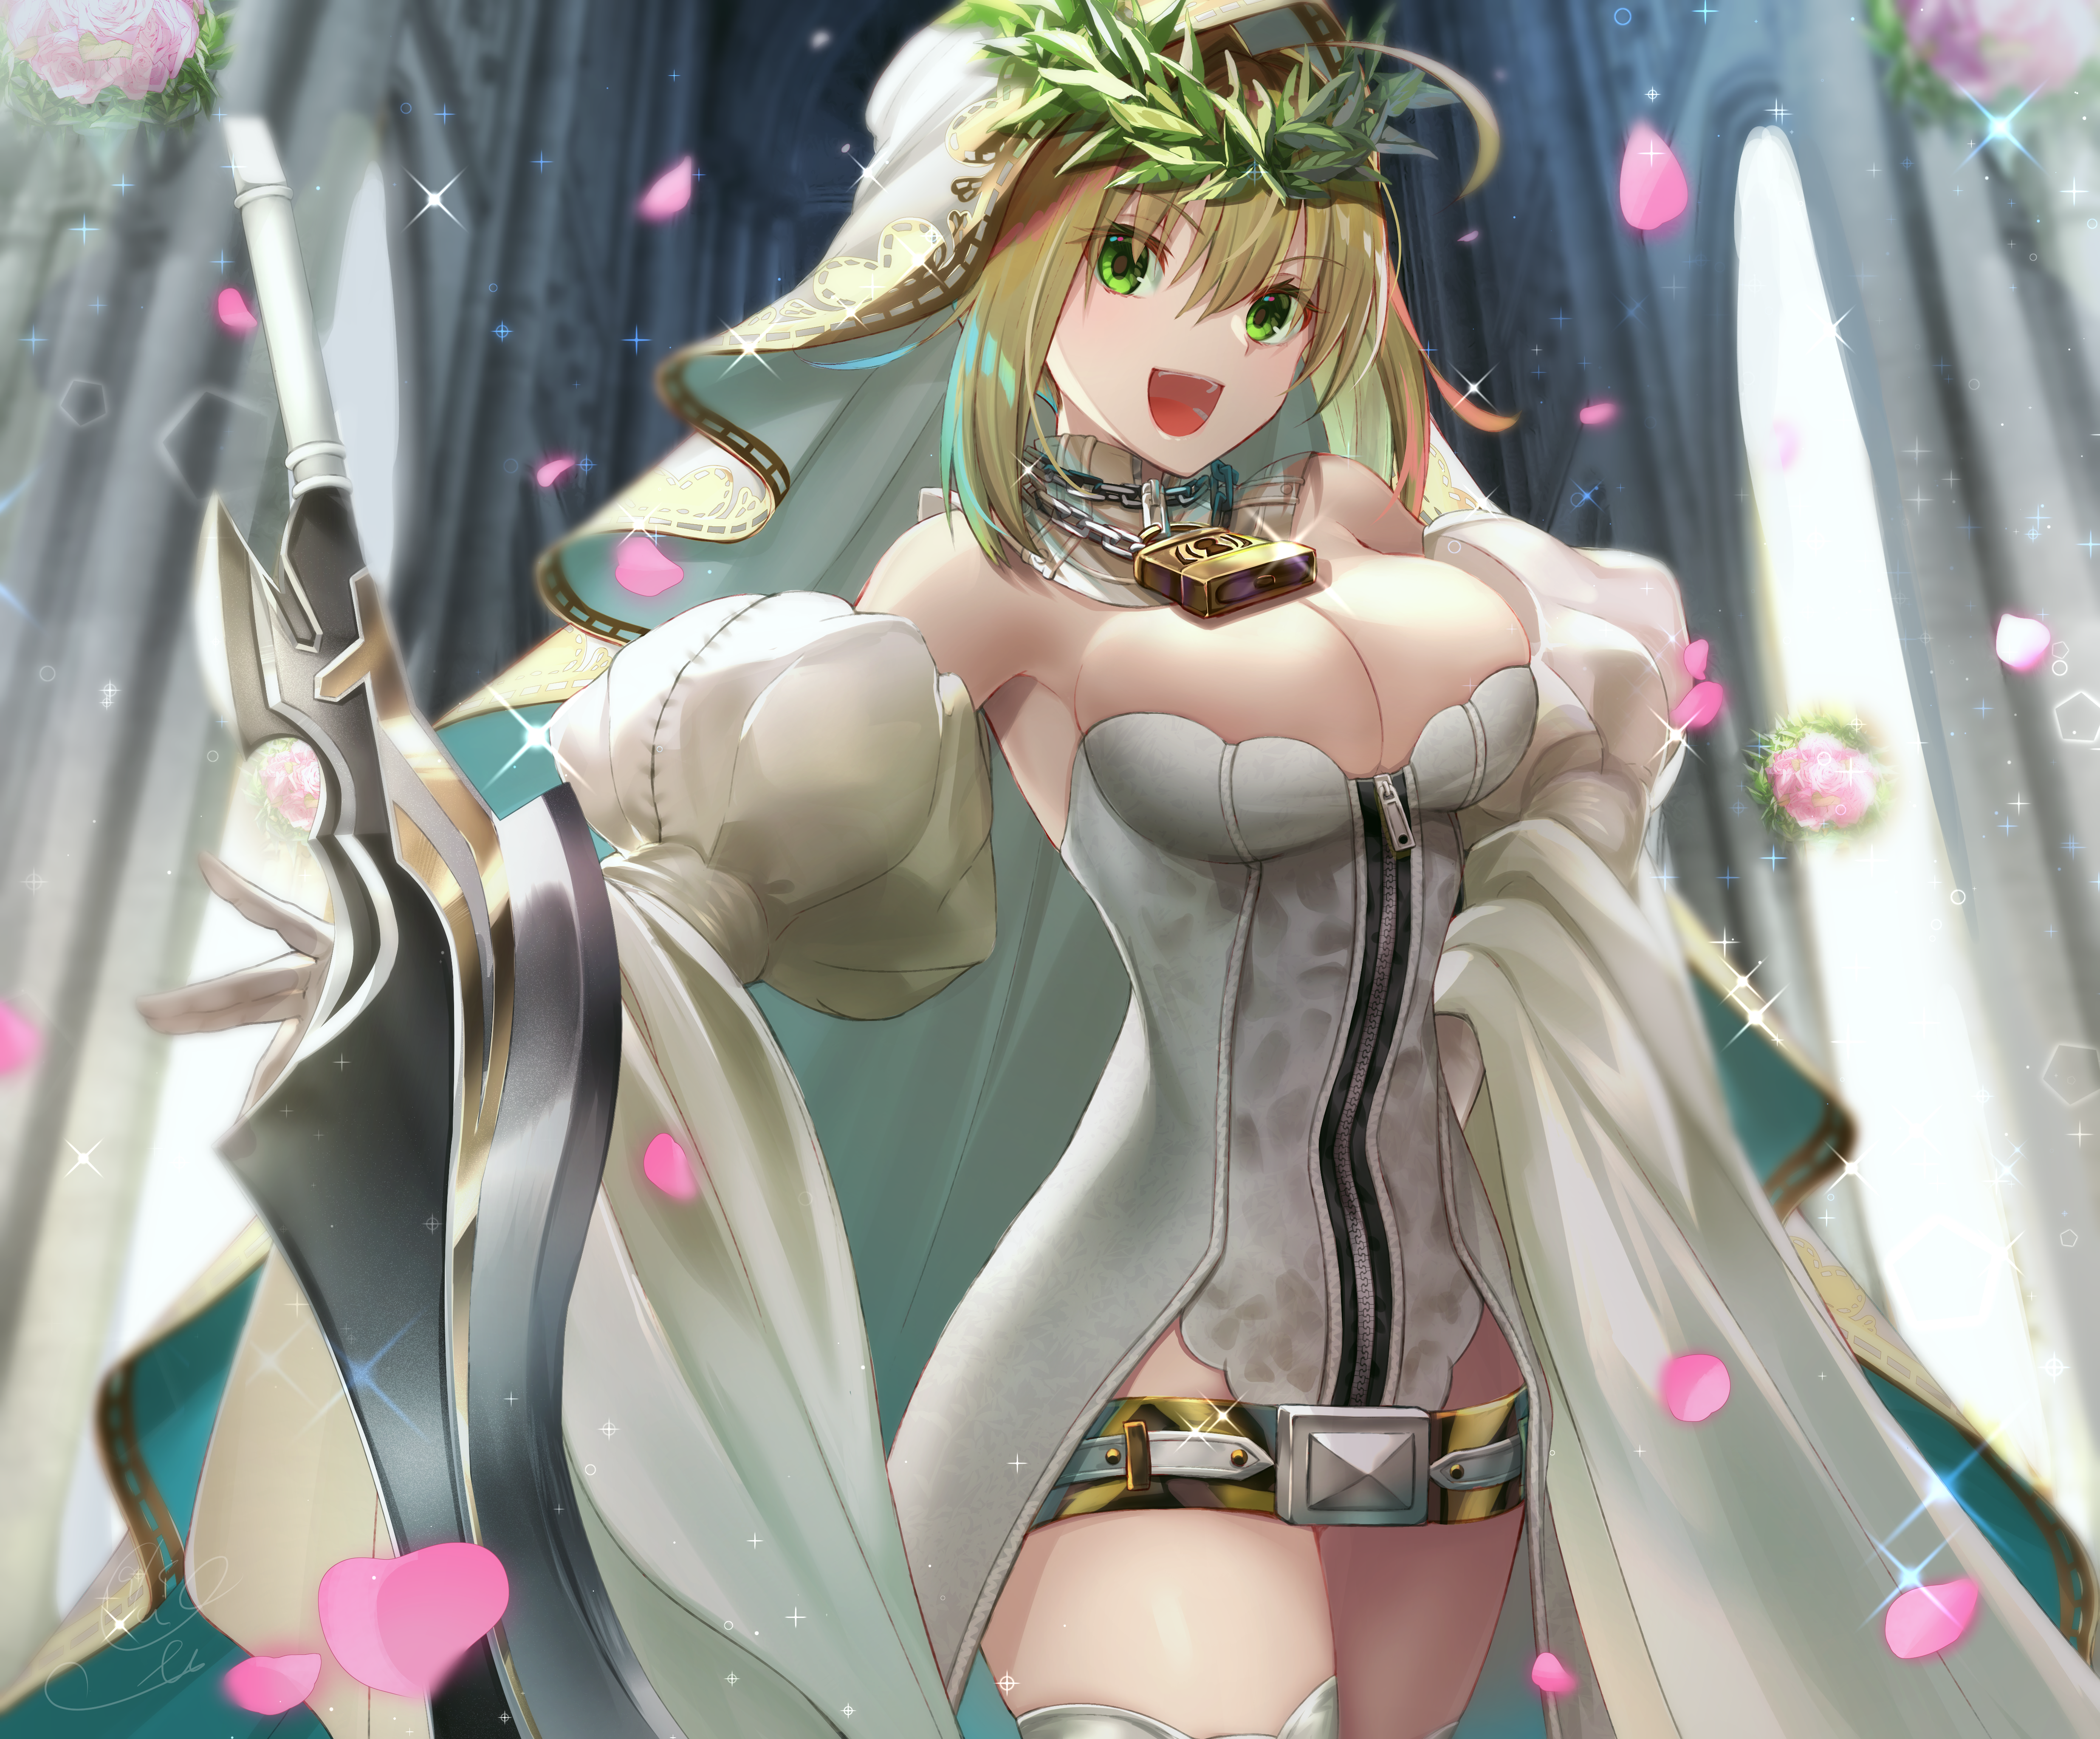 Anime 4944x4093 Fate series Fate/Grand Order anime girls Saber petals cleavage big boobs green eyes weapon blonde Nero Claudius Saber Bride Fate/Extra Fate/Extra CCC